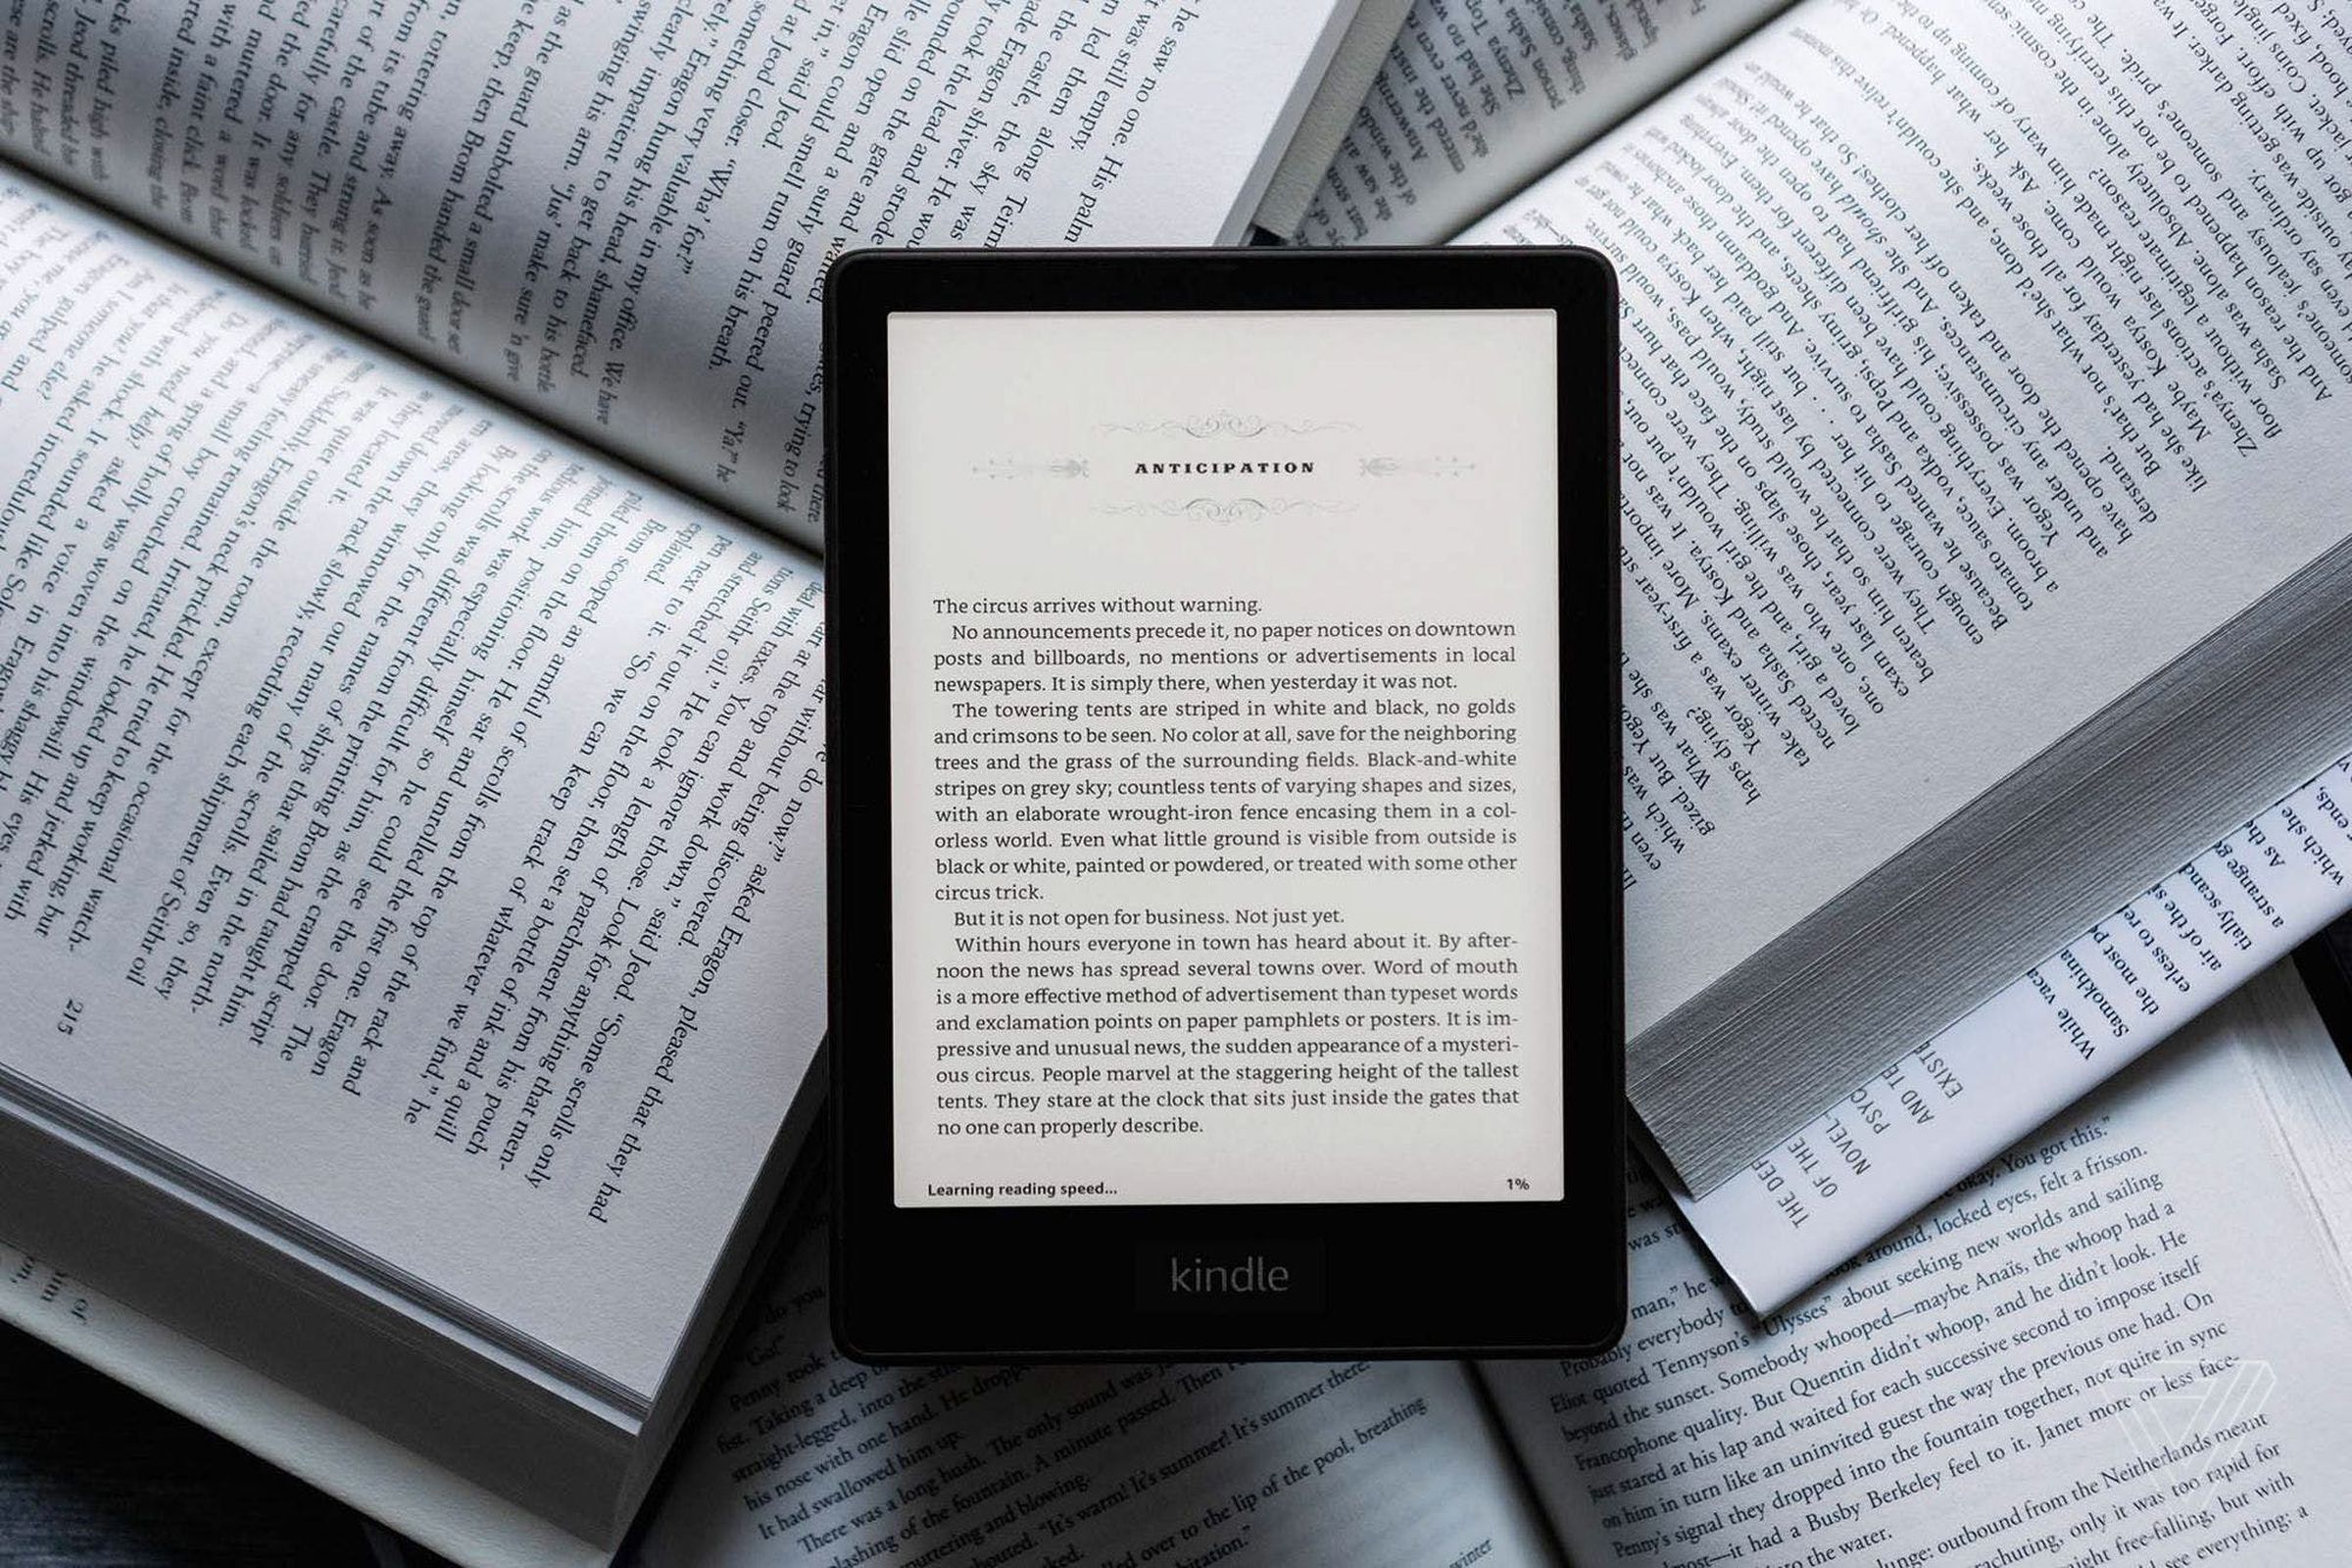 The Kindle Paperwhite e-reader turned with its display on while lying on top of open books.